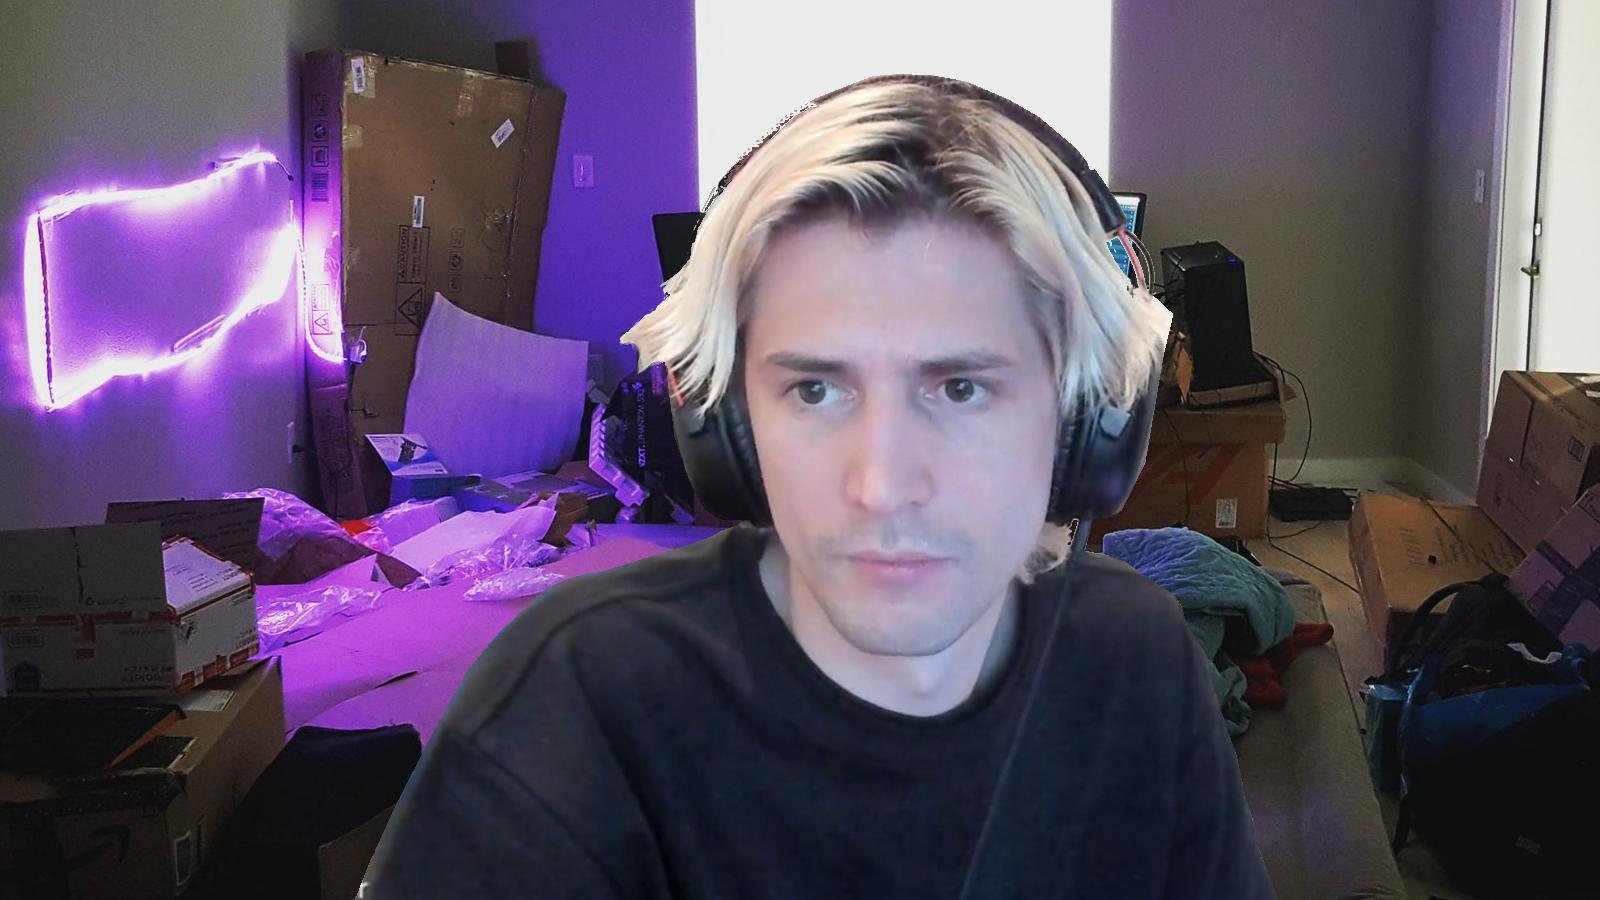 xQc with headphones sitting in a gaming chair during his stream edited onto a photo of his very first streaming setup consisting of boxes and an air mattress.